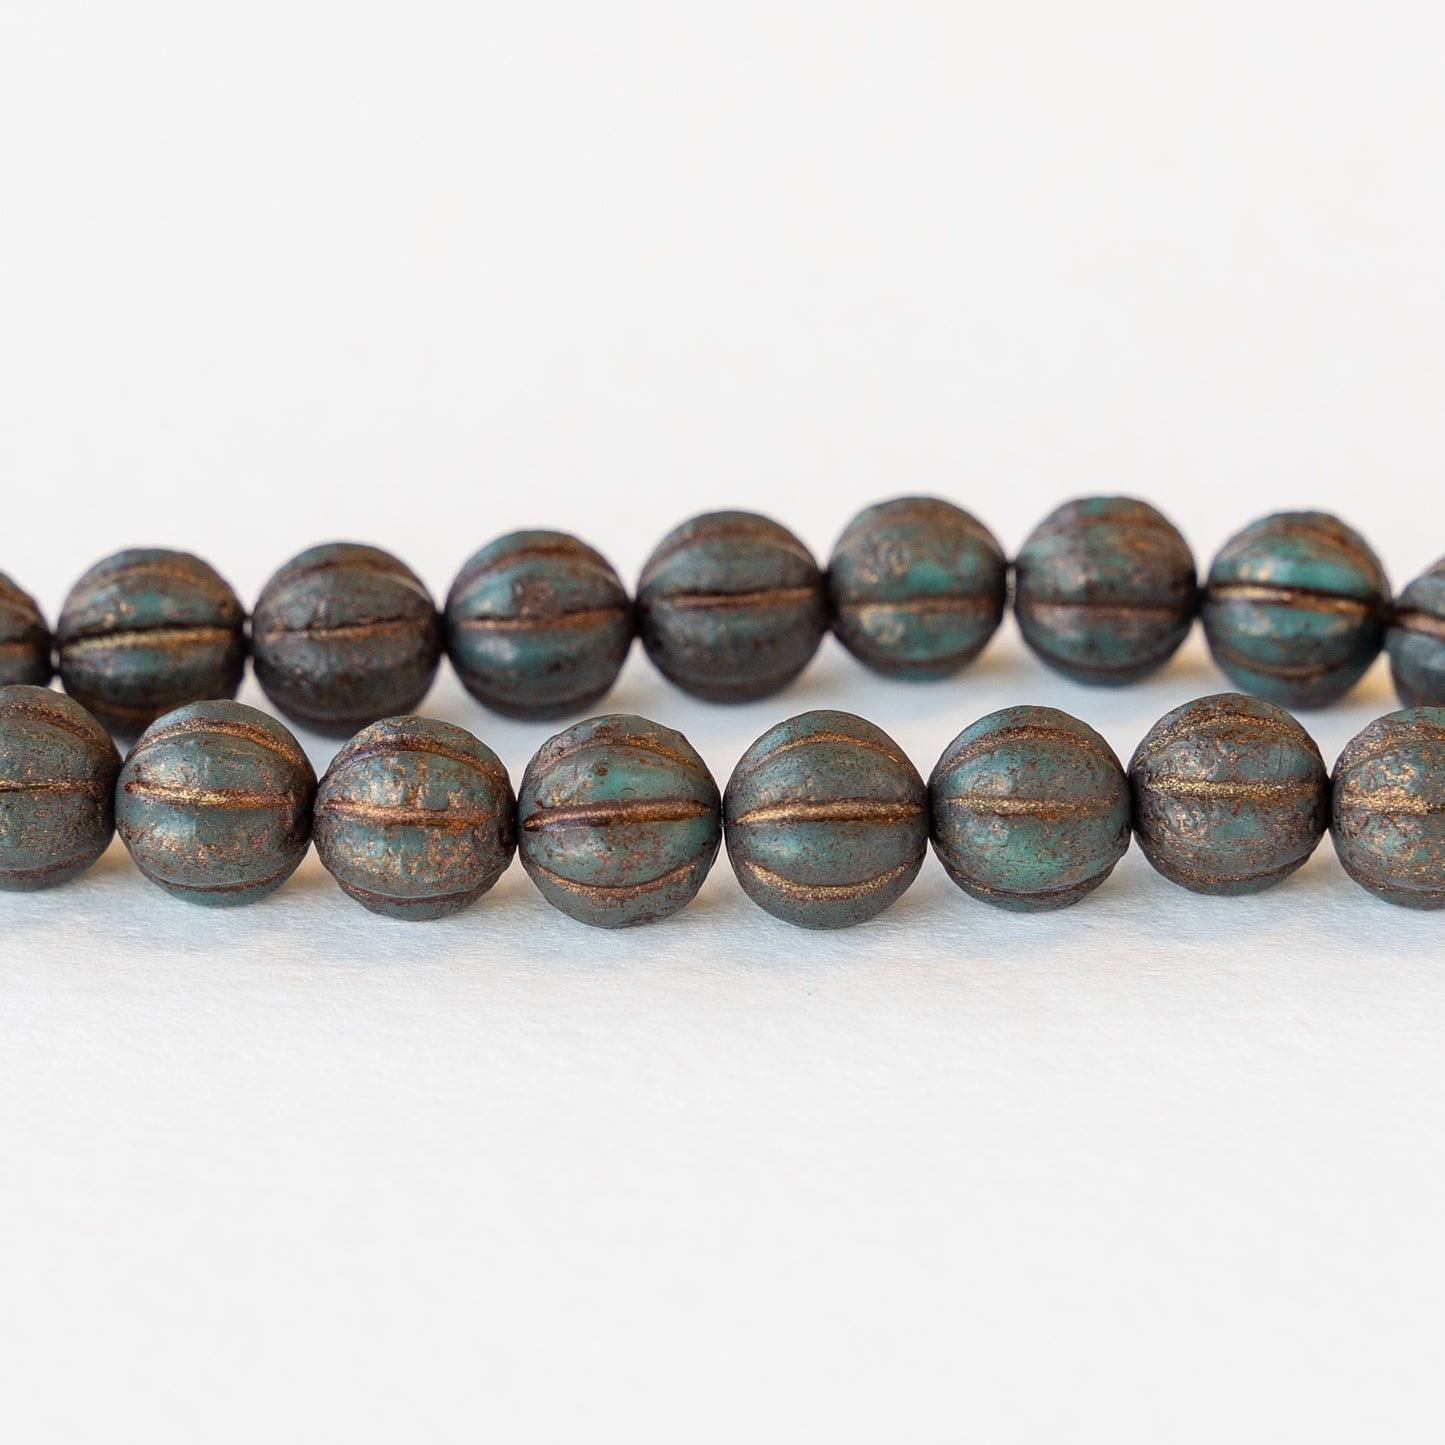 8mm Melon Beads - Dark Turquoise with Bronze Wash - 30 Beads